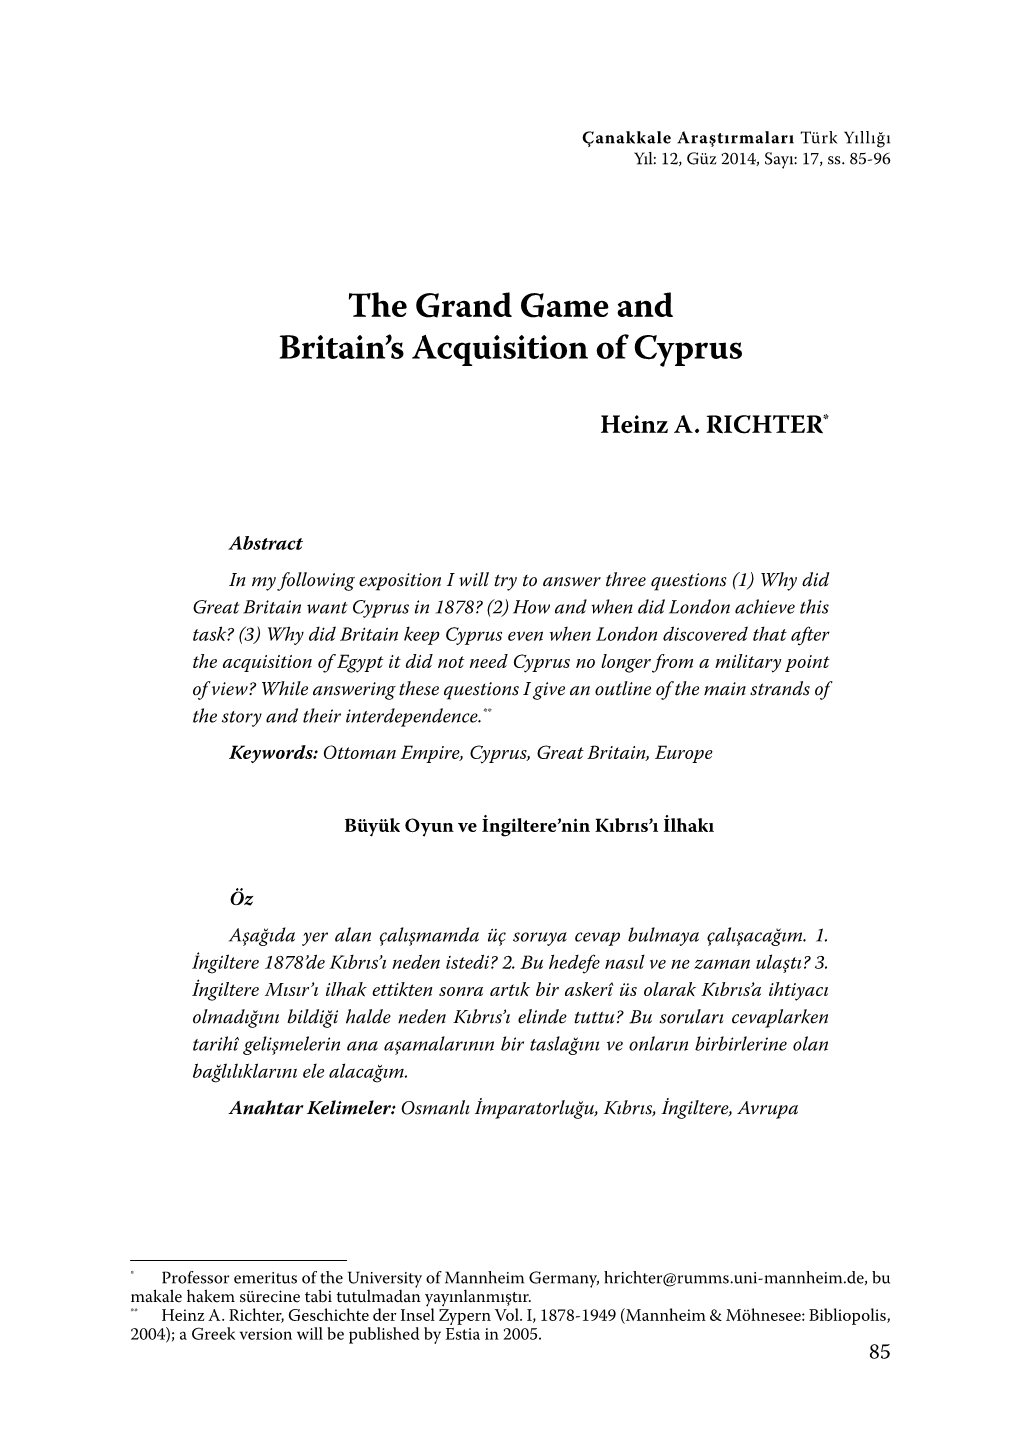 The Grand Game and Britain's Acquisition of Cyprus